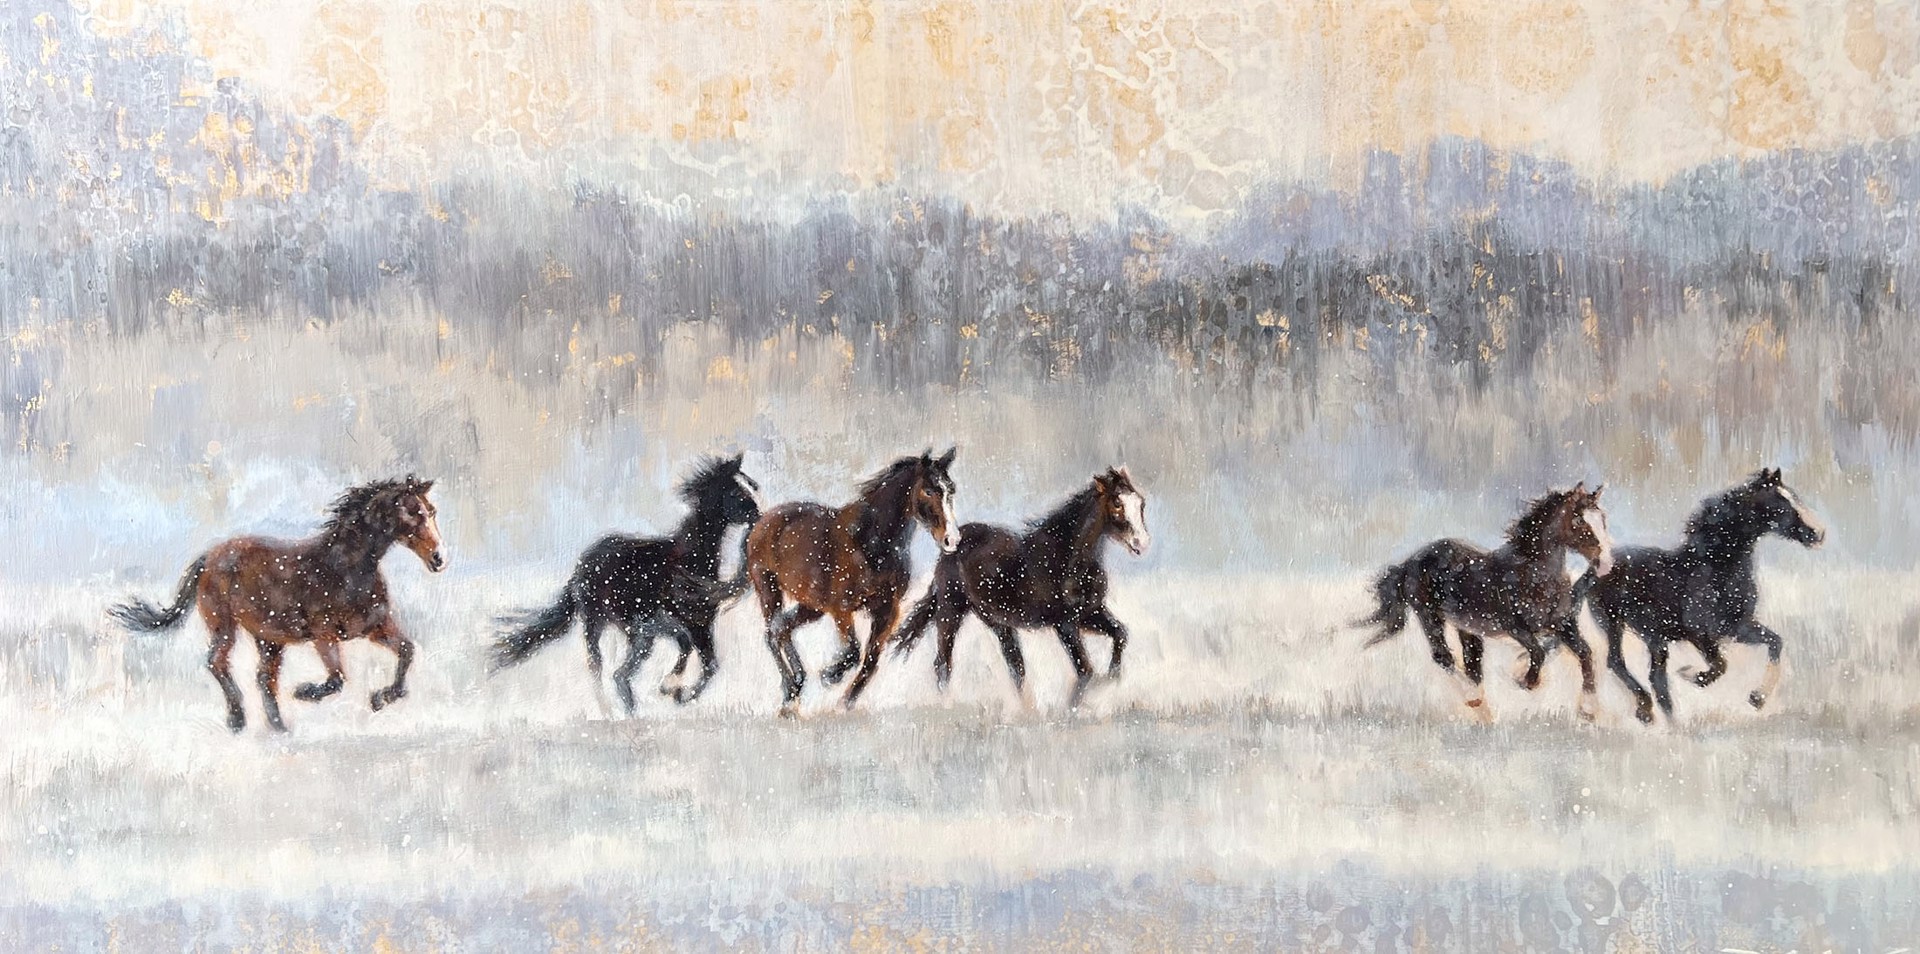 Original Mixed Media Painting By Nealy Riley Featuring A Group Of Horses Running Across Abstracted Landscape Background With Gold Details